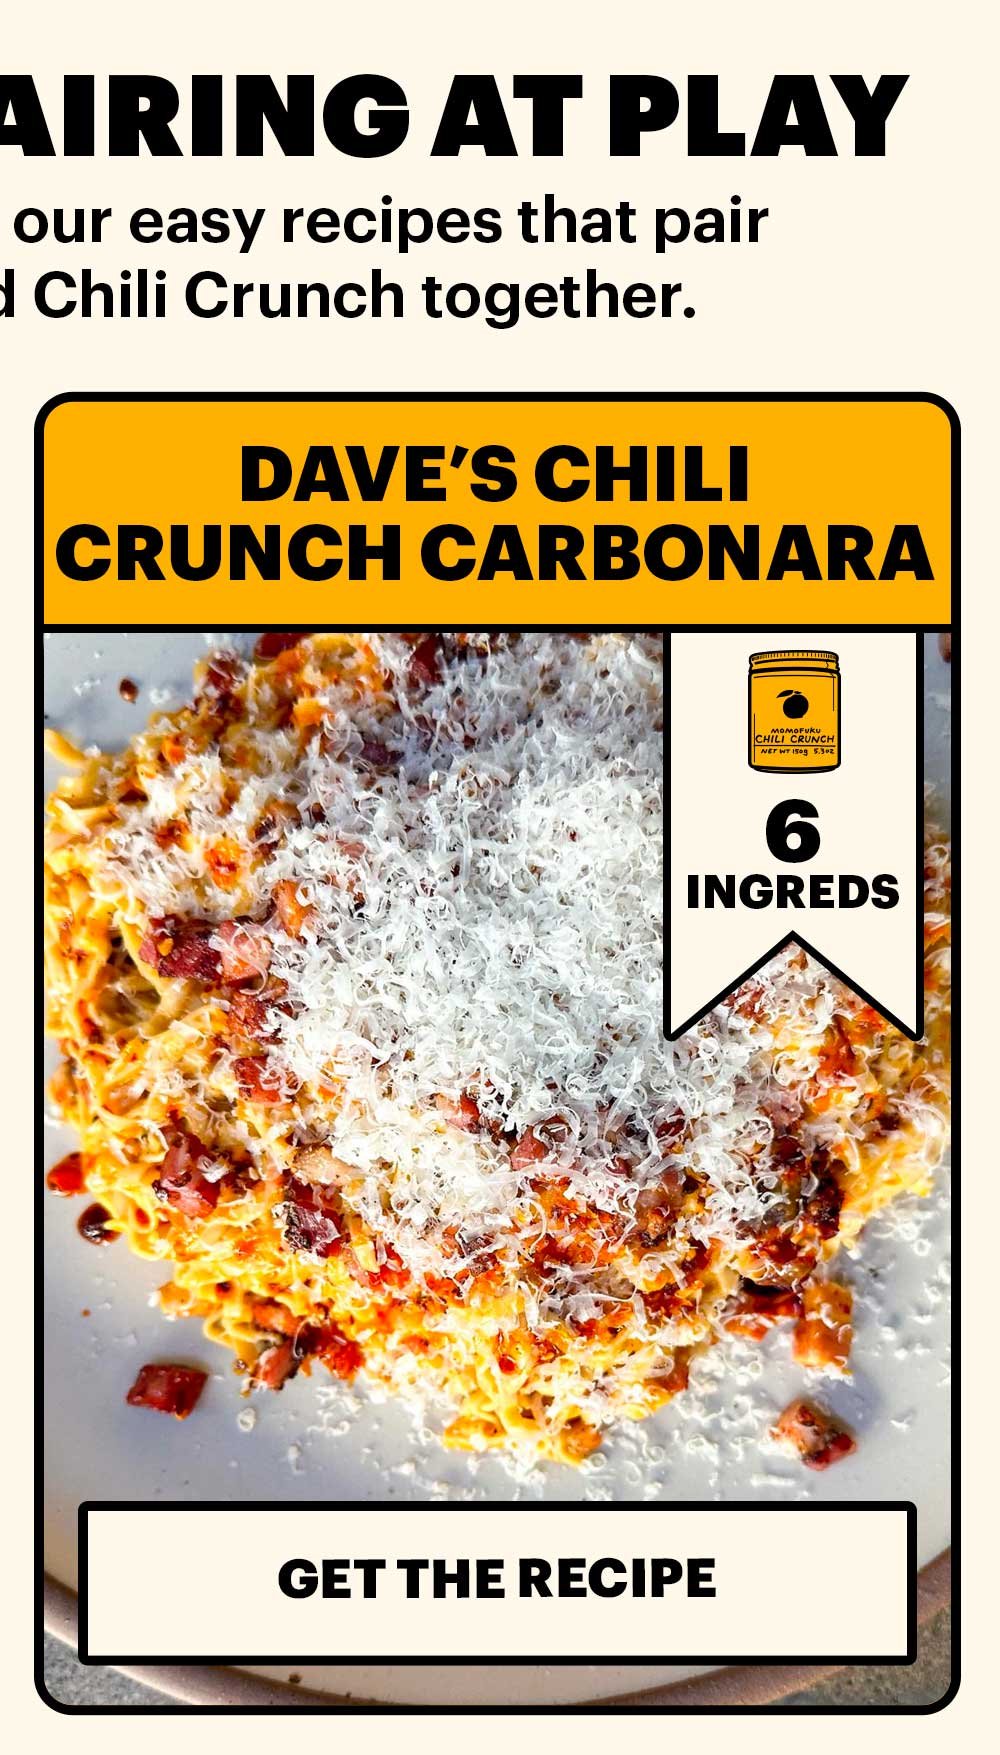 THE PERFECT PAIRING AT PLAY. Get inspired with some of our easy recipes that pair Momofuku Noodles and Chili Crunch together. DAVE'S CHILI CRUNCH CARBONARA. 6 INGREDIENTS. GET THE RECIPE.